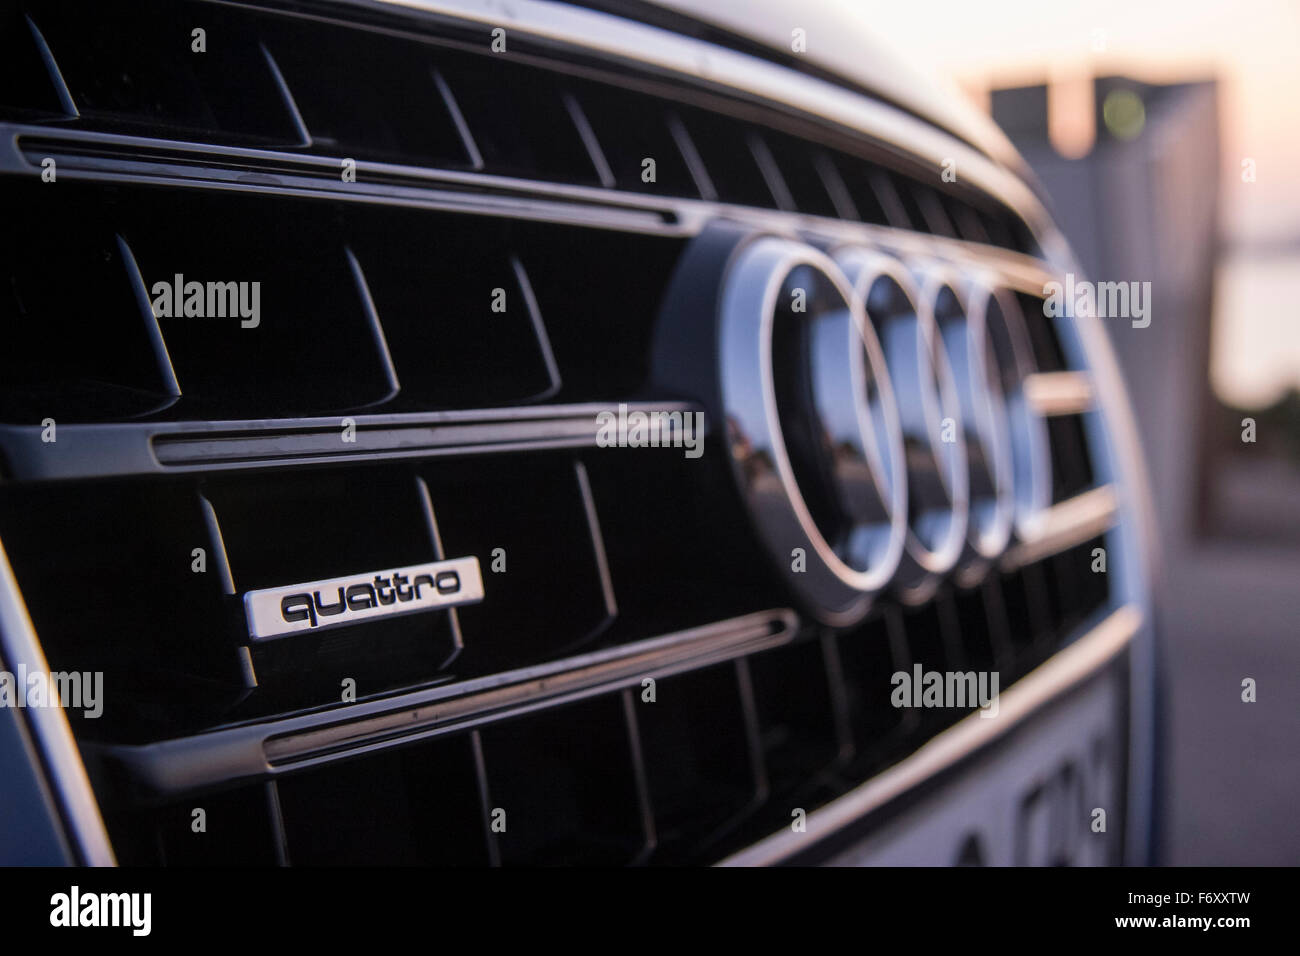 Audi Grill High Resolution Stock Photography and Images - Alamy